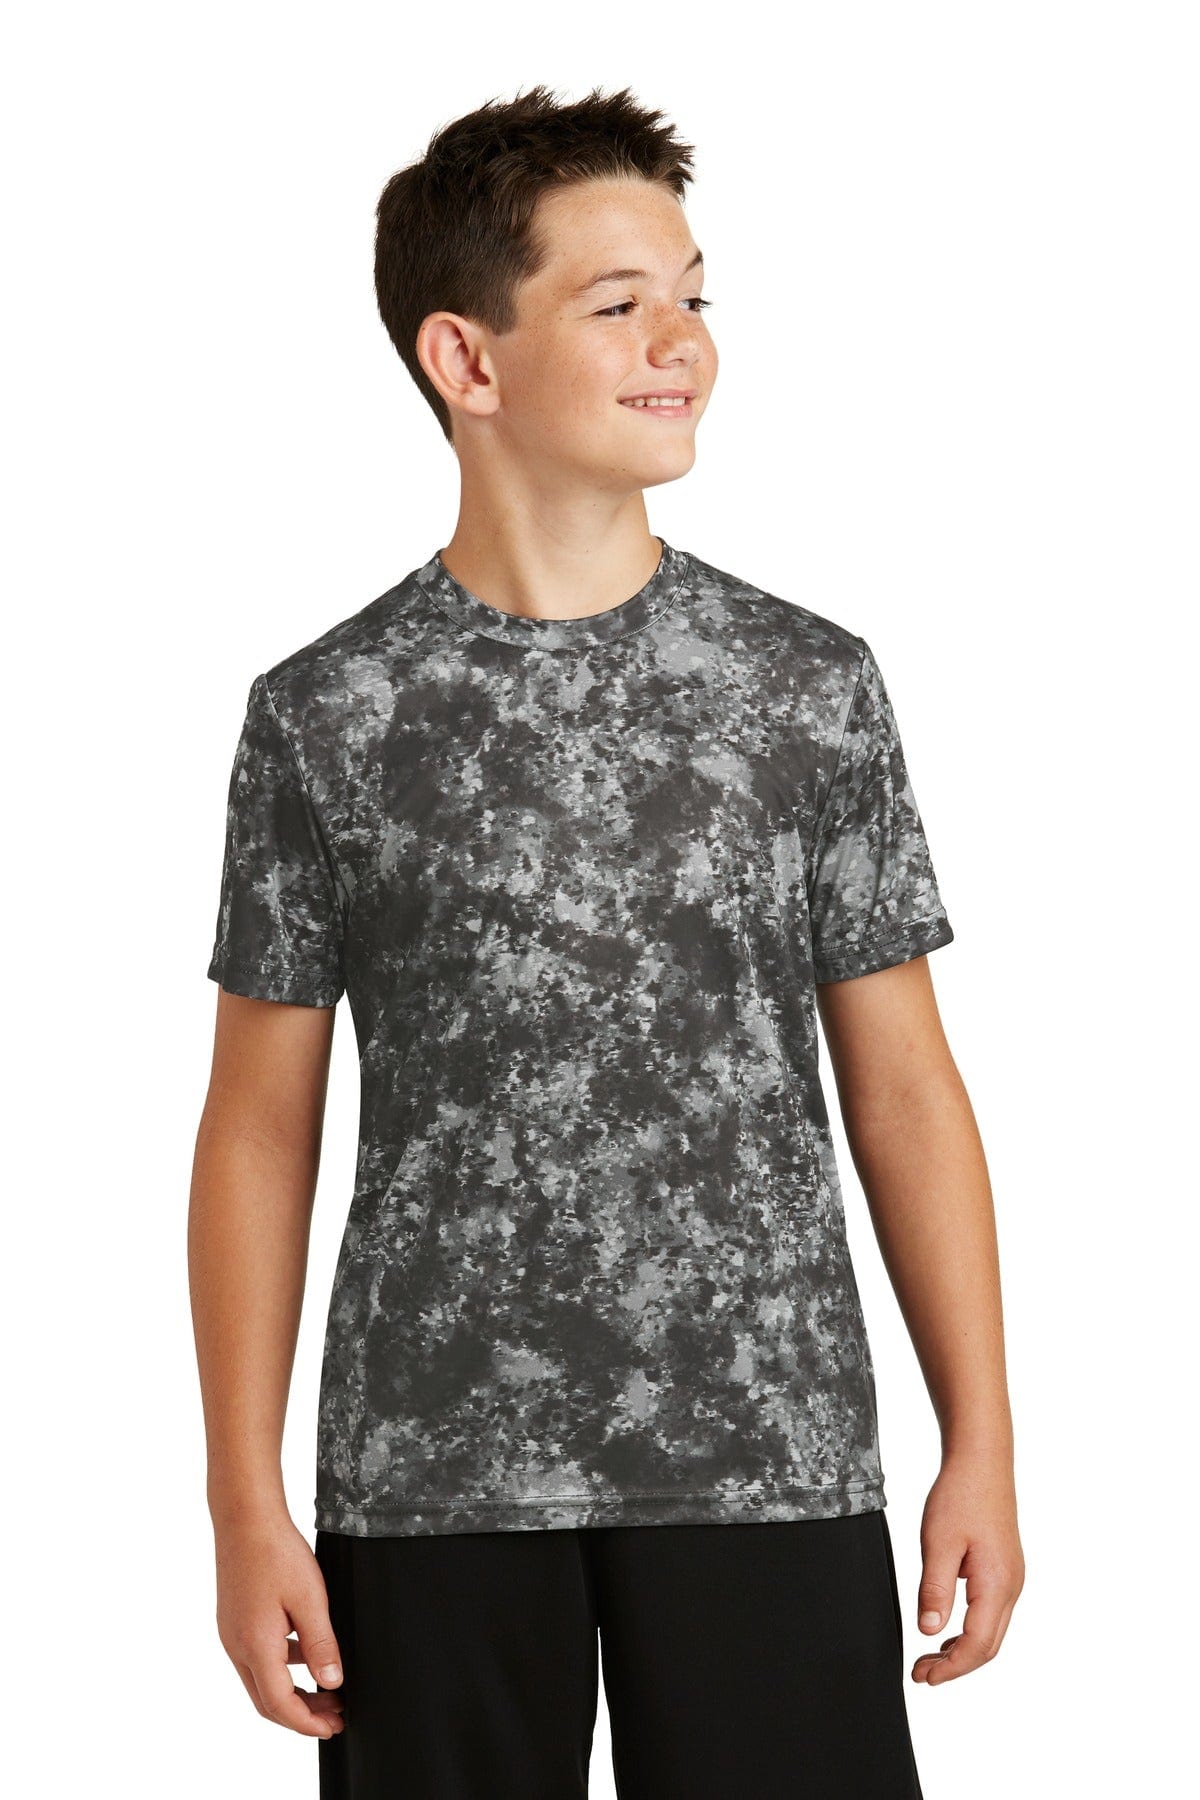 DISCONTINUED Sport-Tek ® Youth Mineral Freeze Tee. YST330